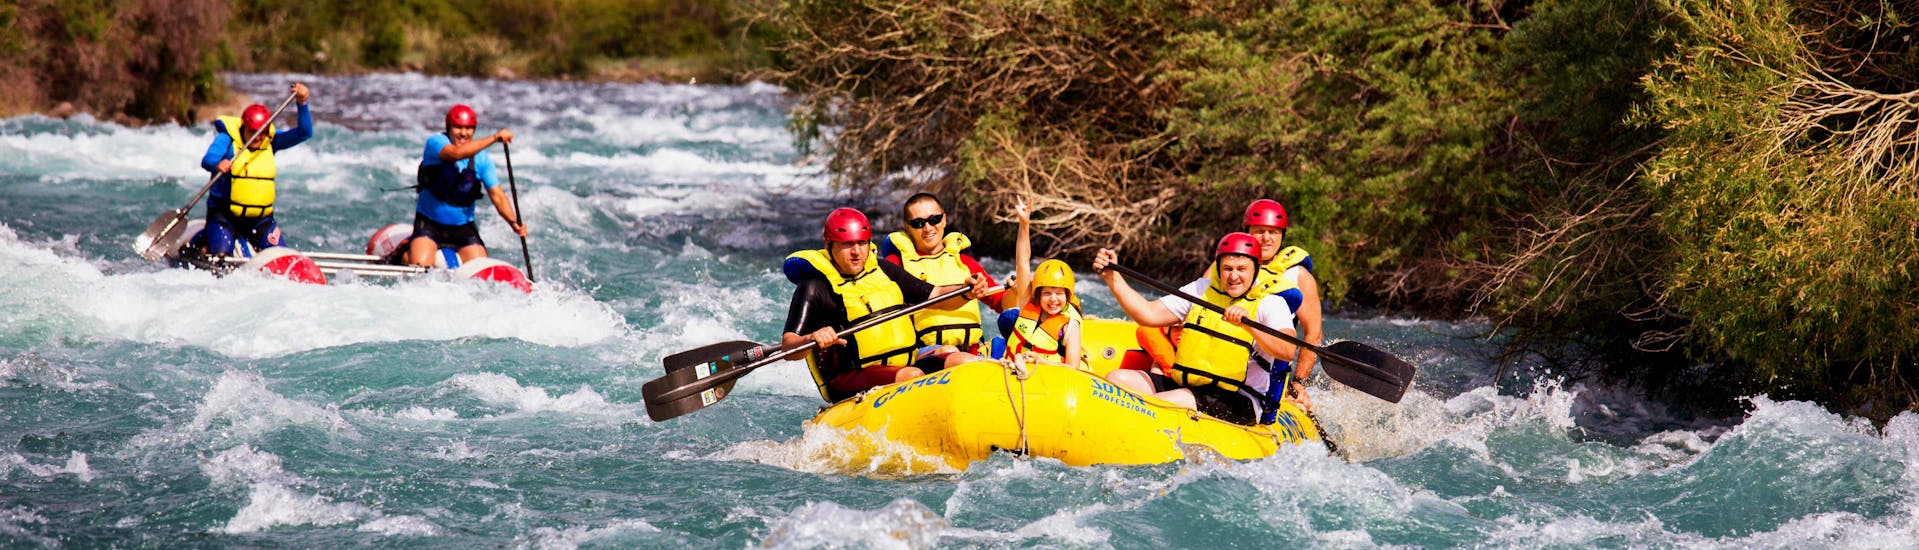  Parents and kids enjoy rafting in the river together